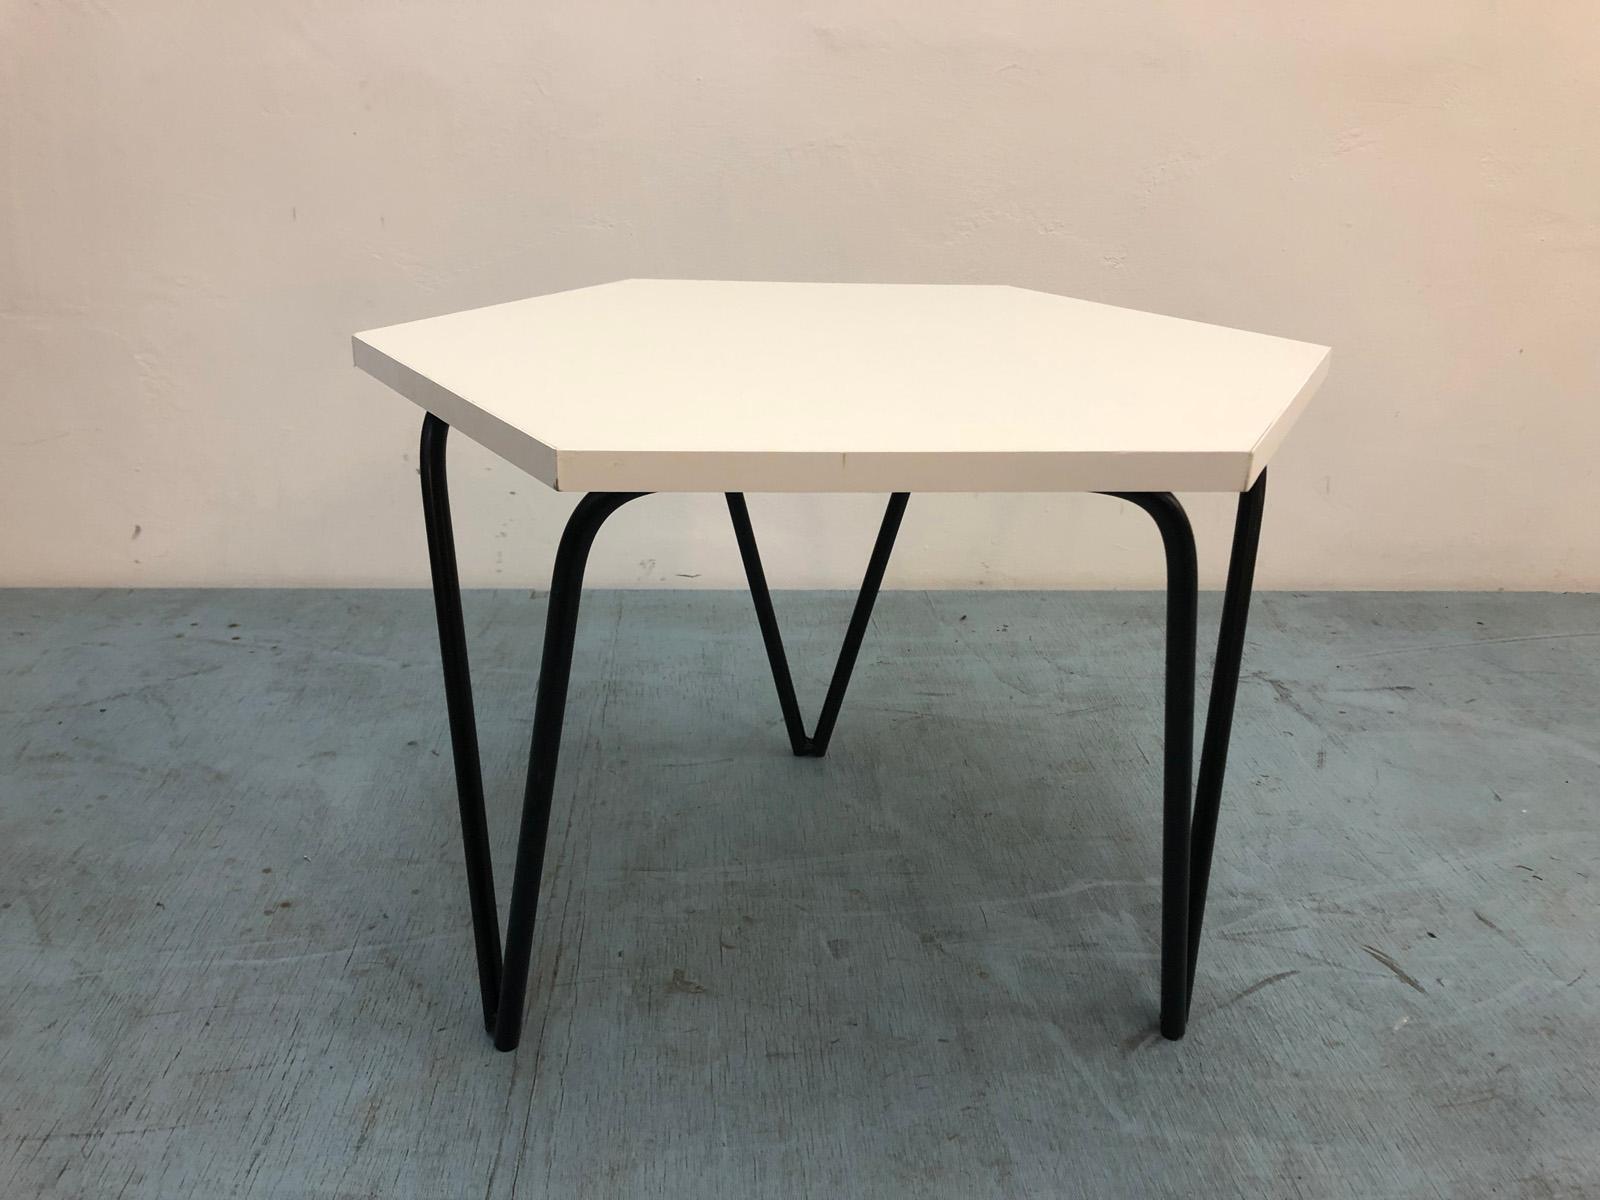 Set of Three Low Hexagonal Coffee Tables by Giò Ponti for Isa Bergamo, Italy 50s For Sale 5